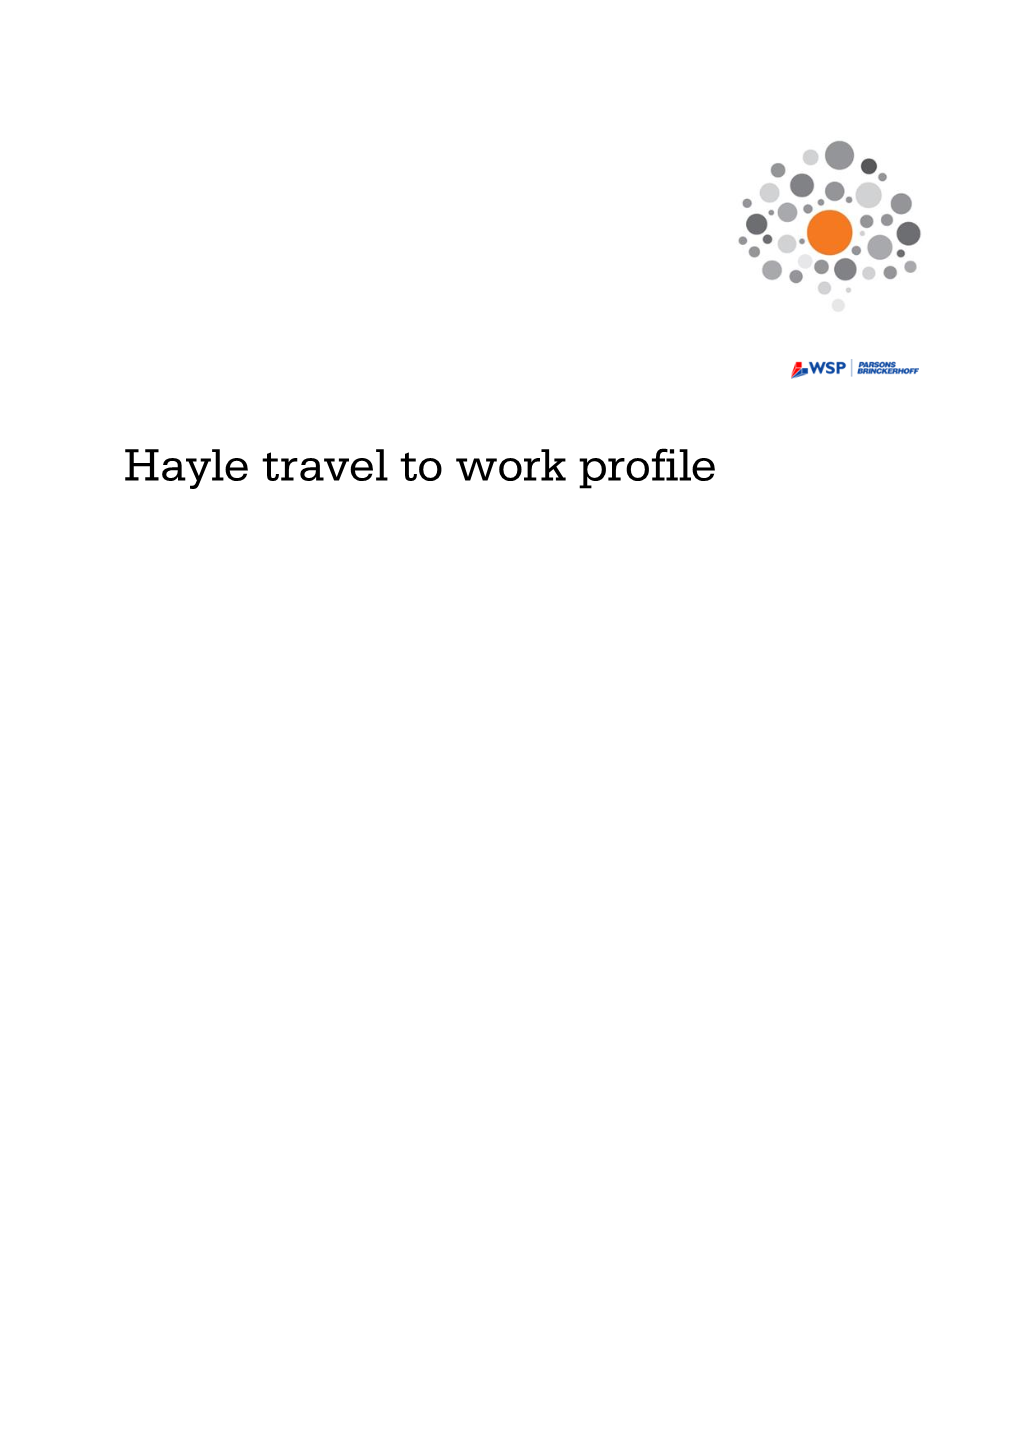 Hayle Travel to Work Profile